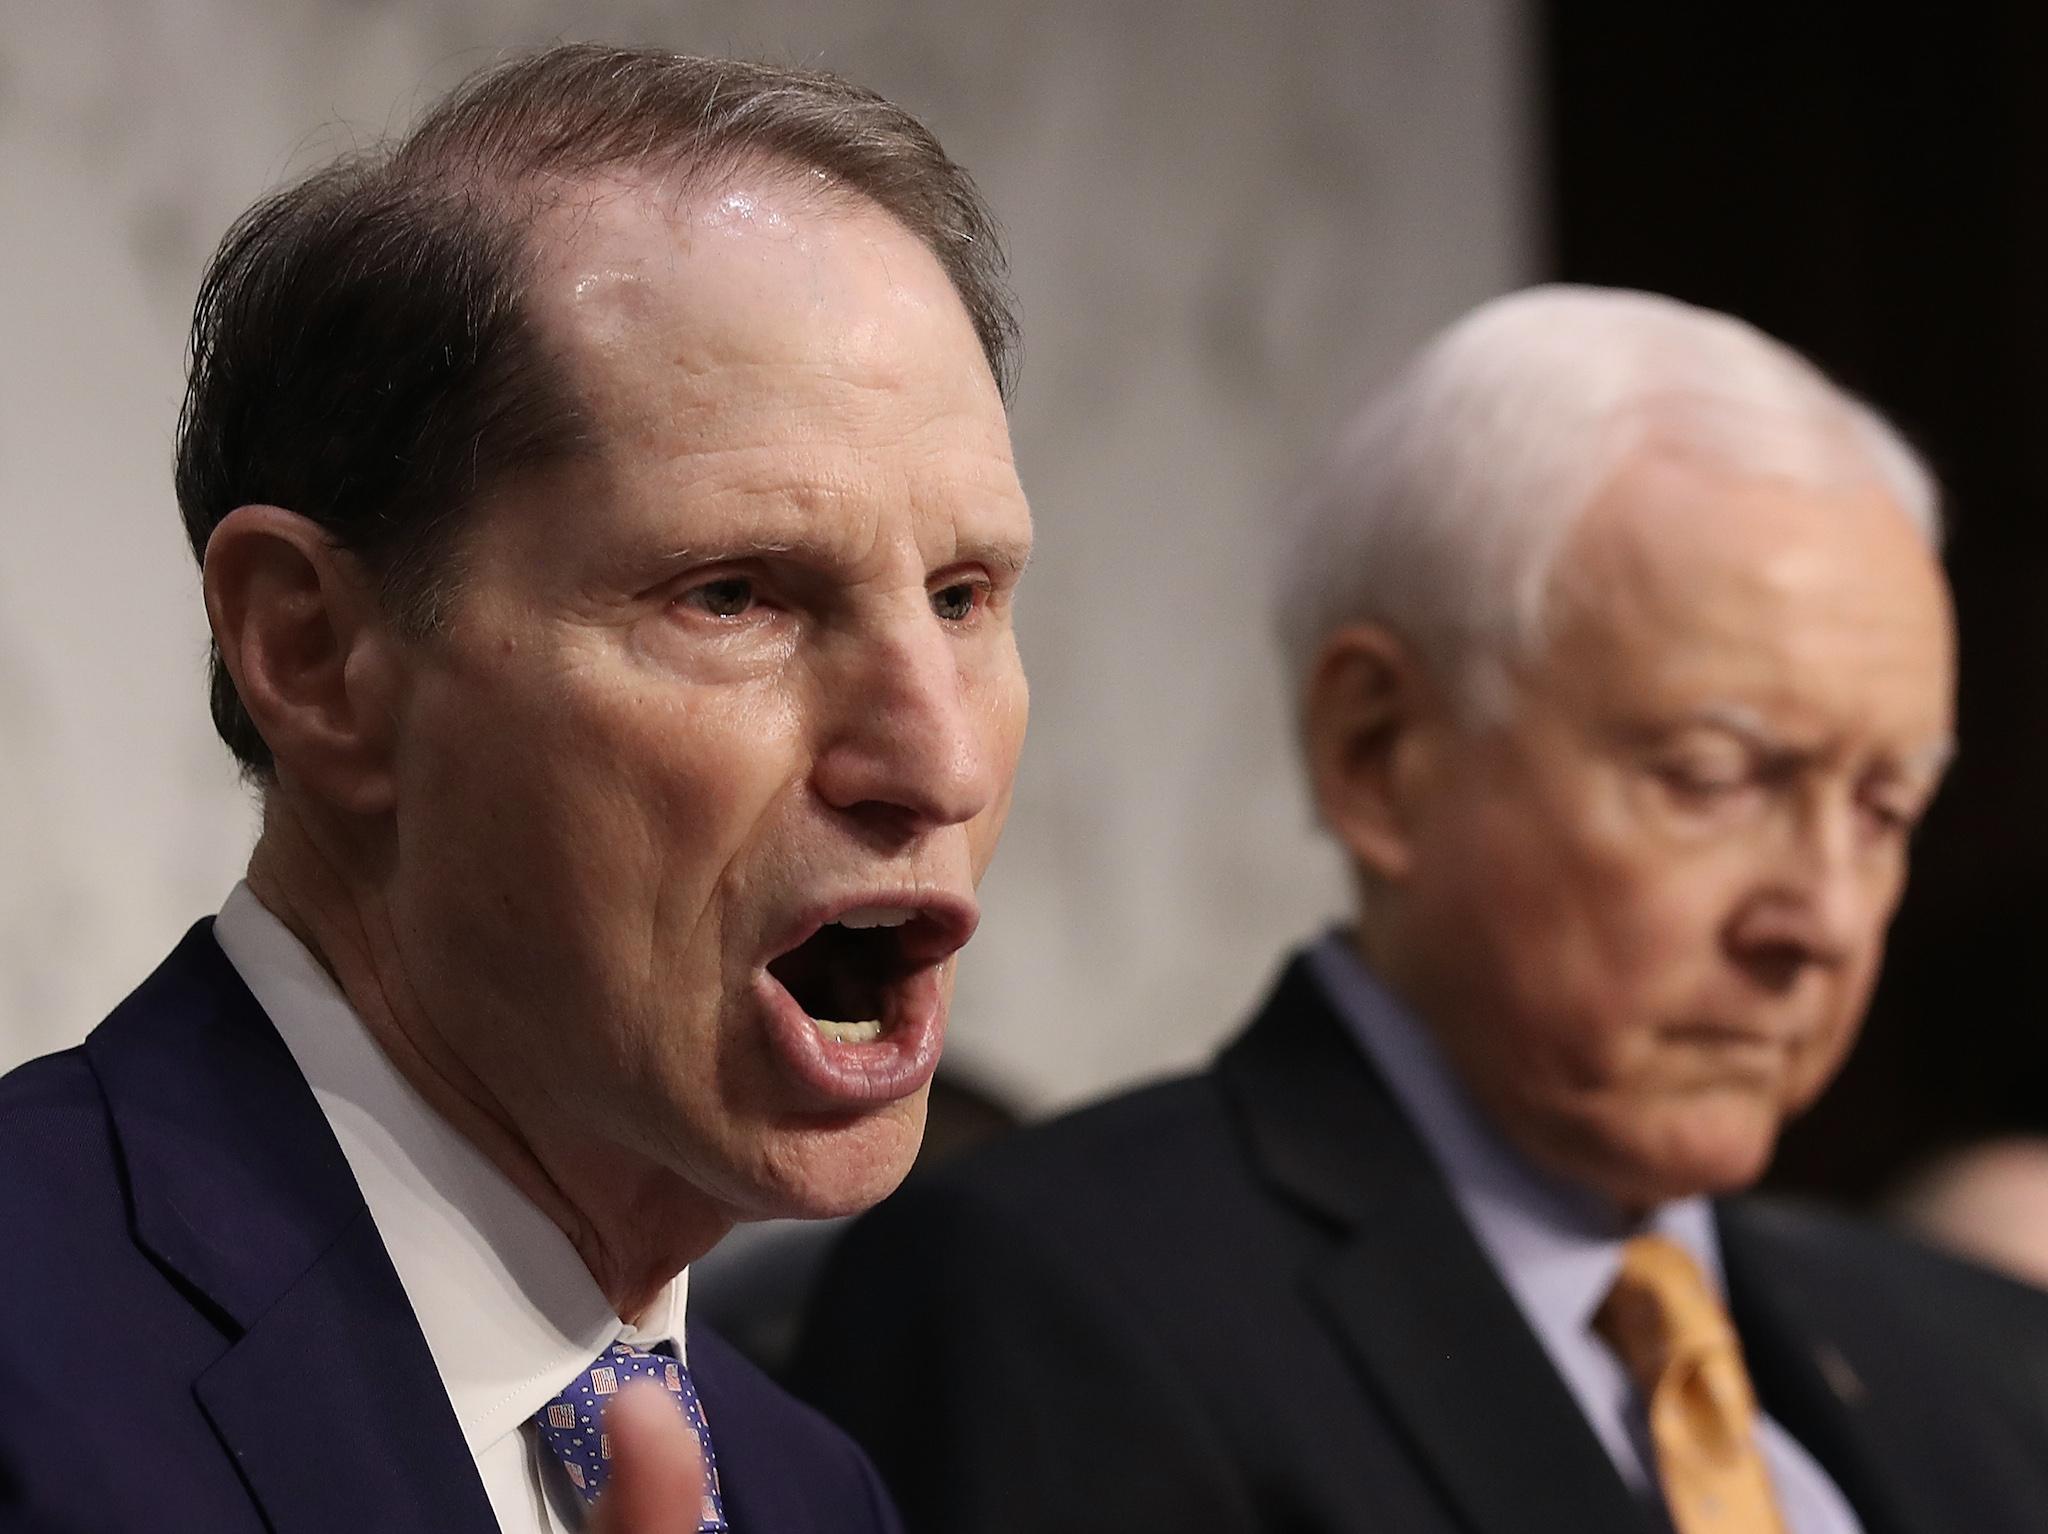 Sen. Ron Wyden, ranking member of the Senate Finance Committee speaks during a markup of the Republican tax reform proposal (Photo by Win McNamee/Getty Images)